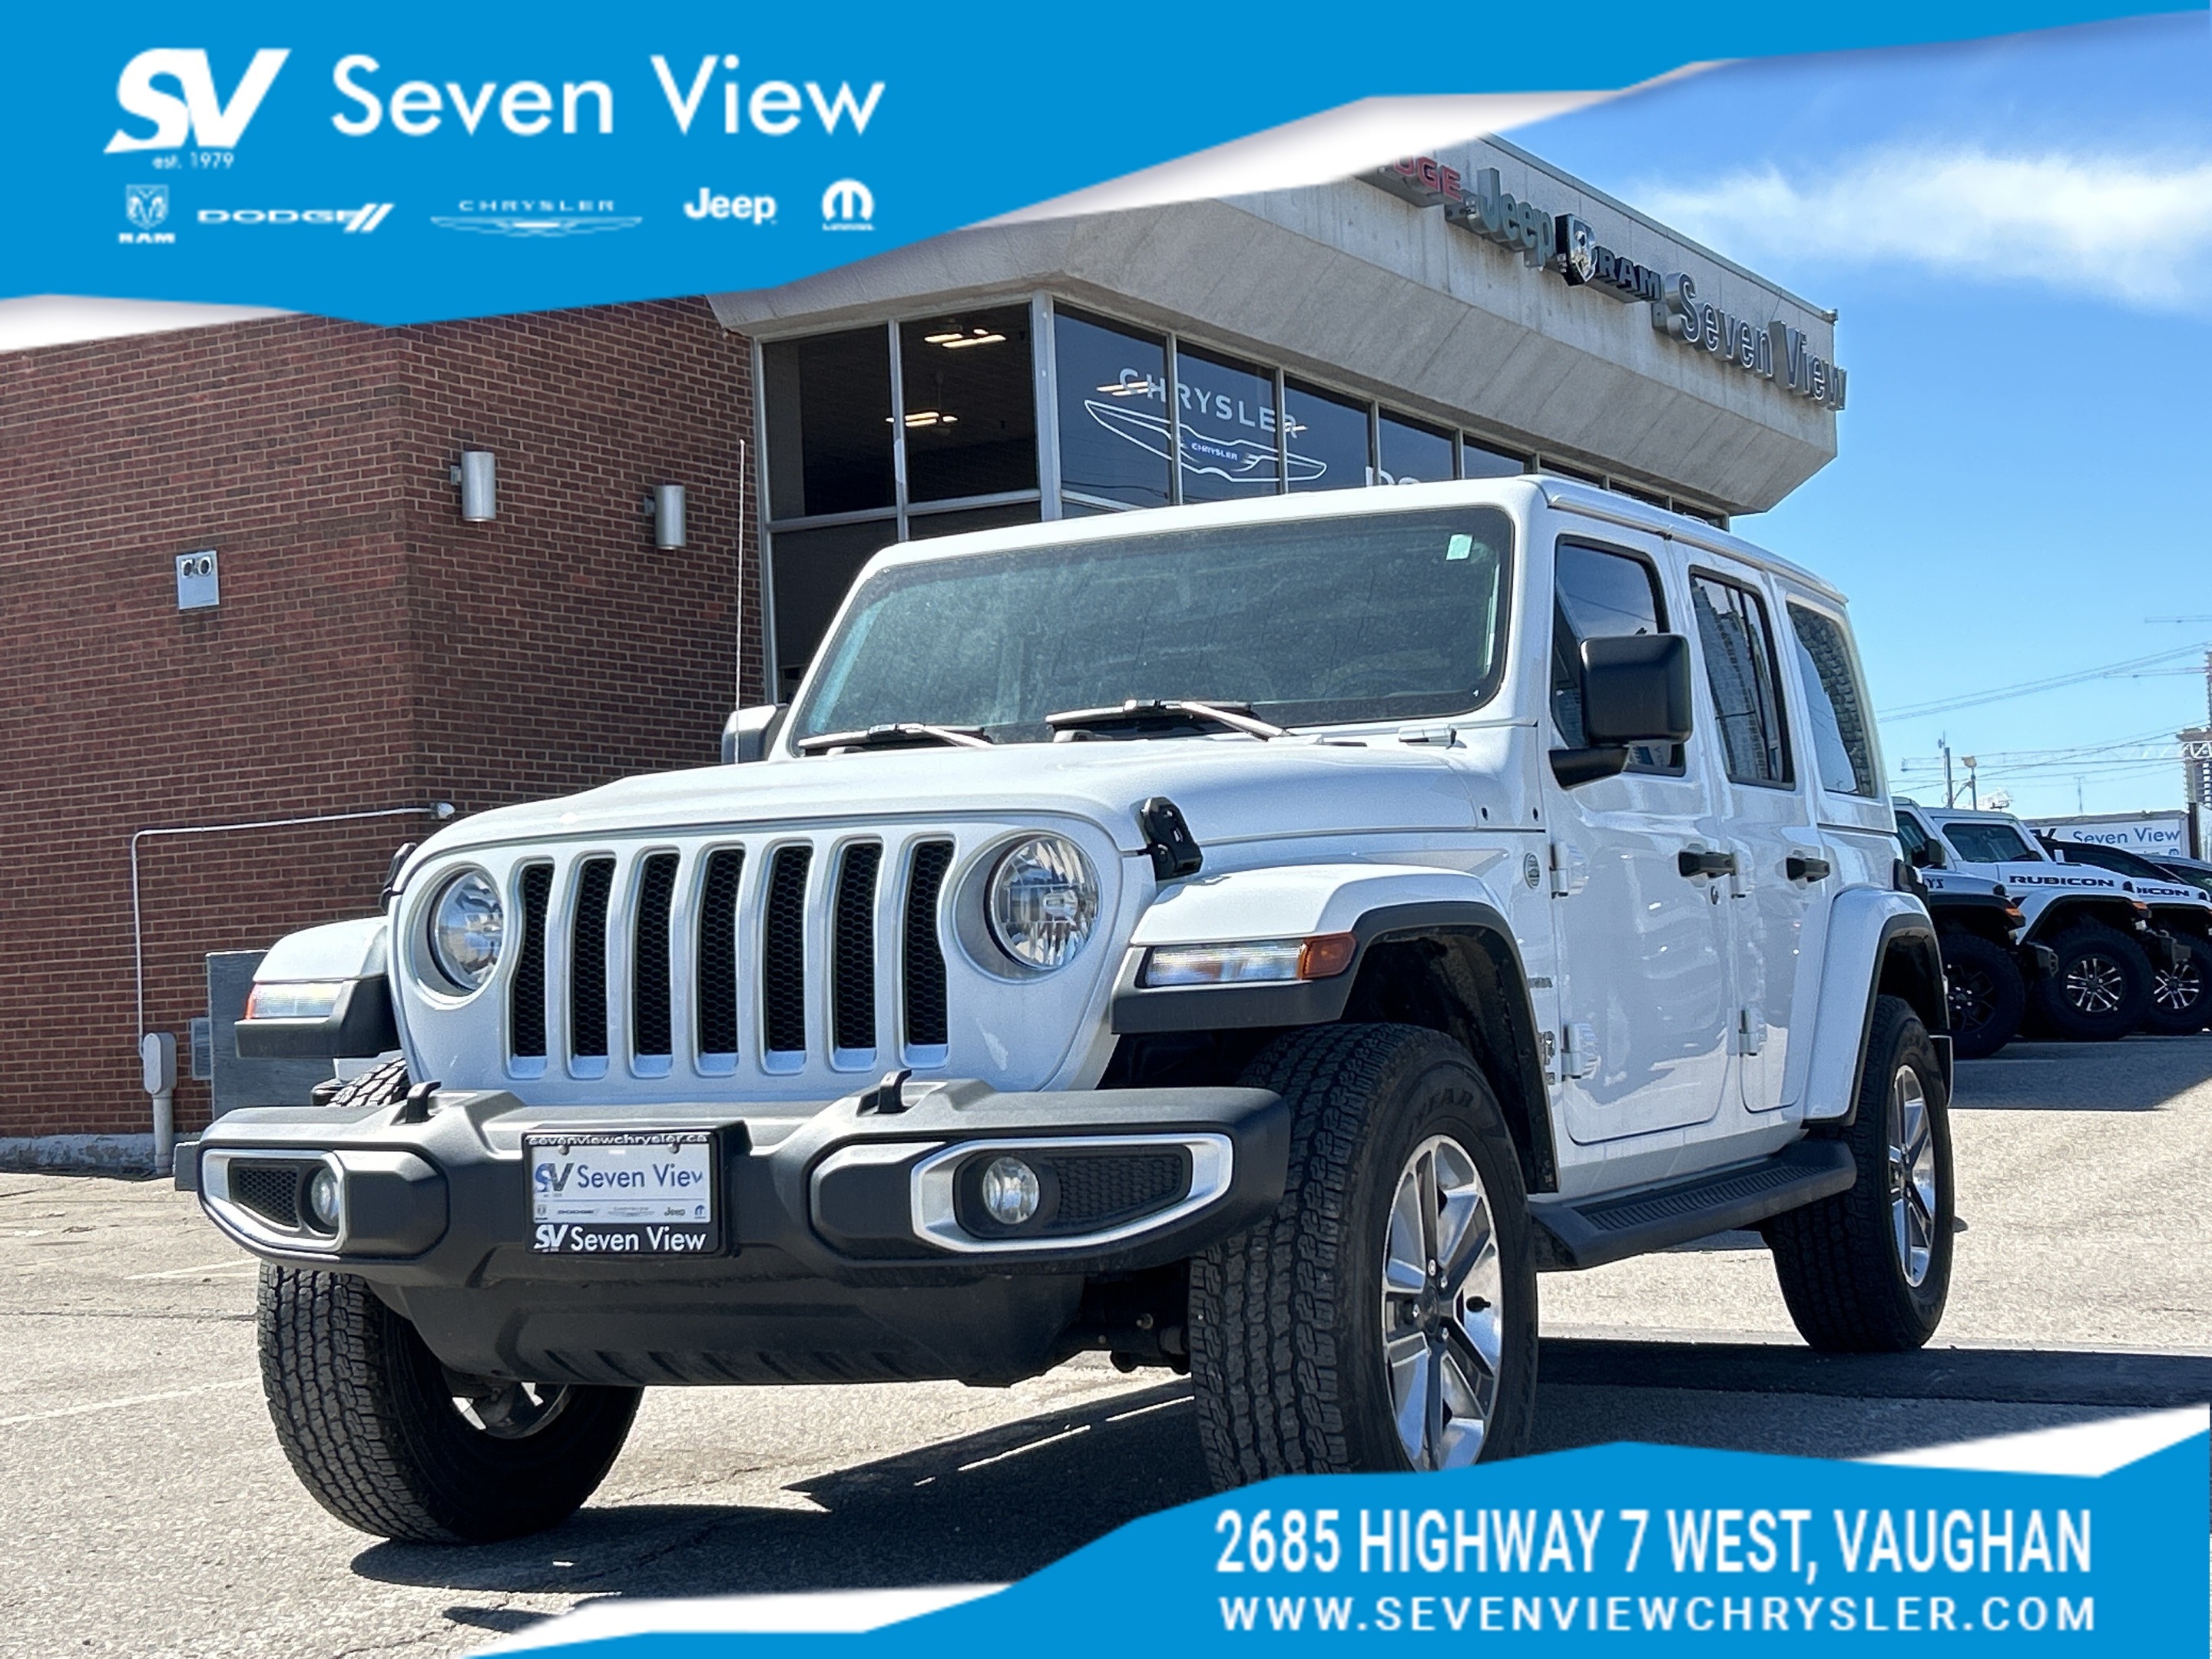 2020 Jeep WRANGLER UNLIMITED Sahara 4x4 NAVI/SAFETY GROUP/COLD WEATHER GROUP